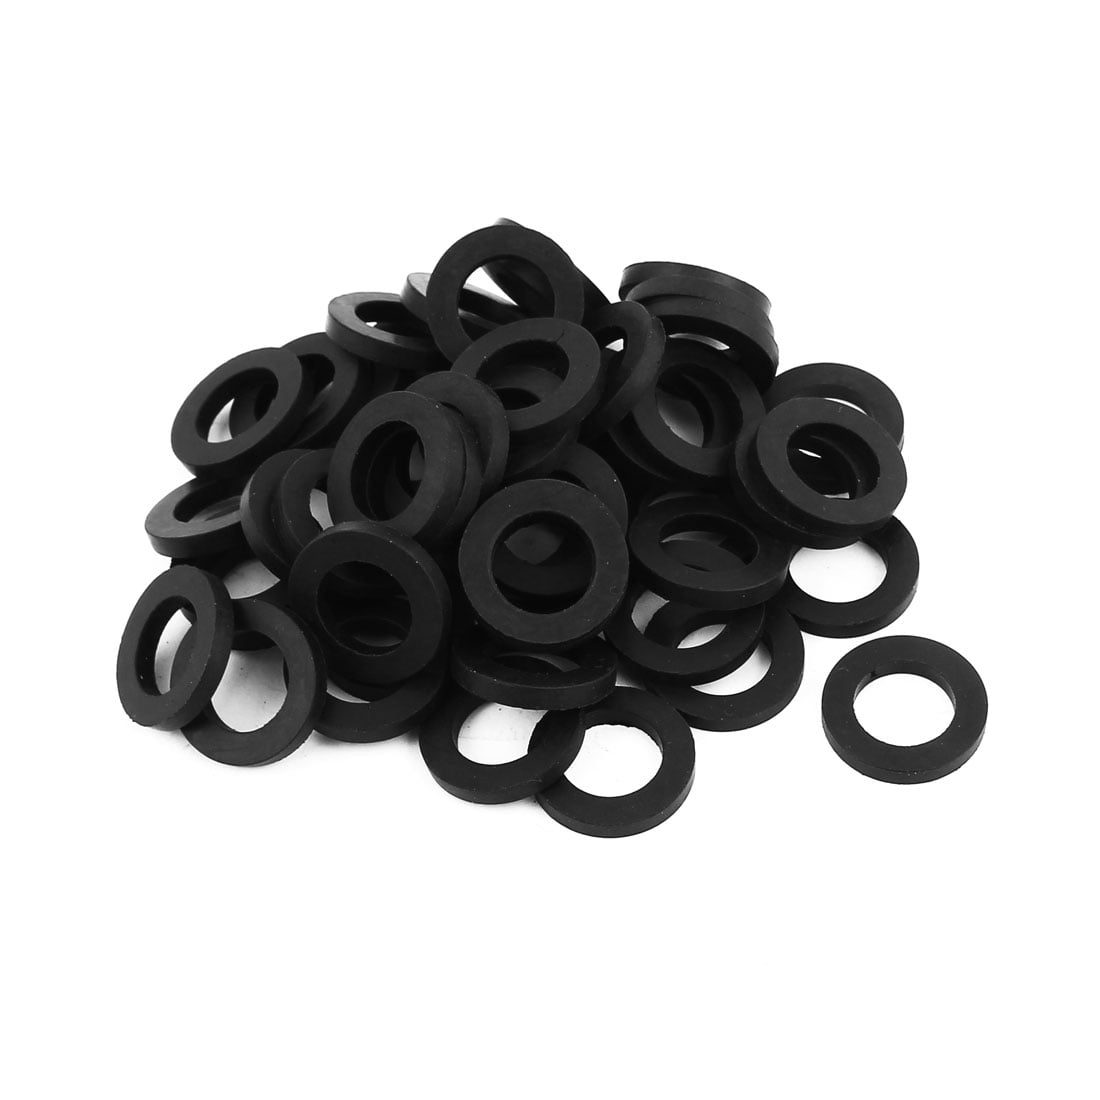 13 X 21 X 3mm O Ring Hose Gasket Flat Rubber Washer Lot For Faucet